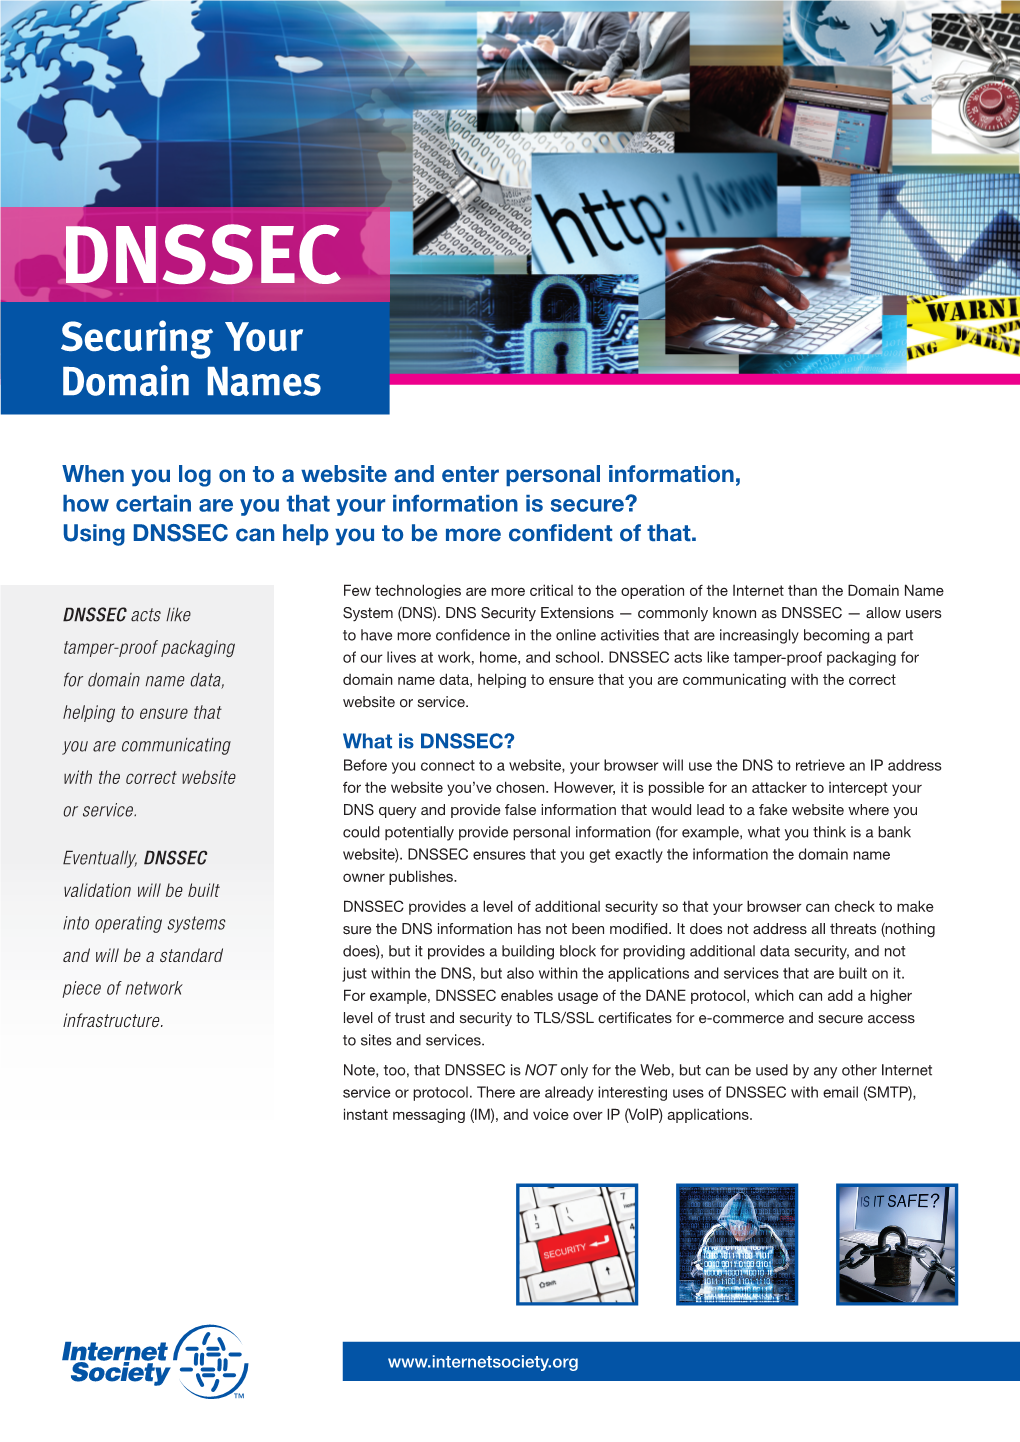 DNSSEC Securing Your Domain Names